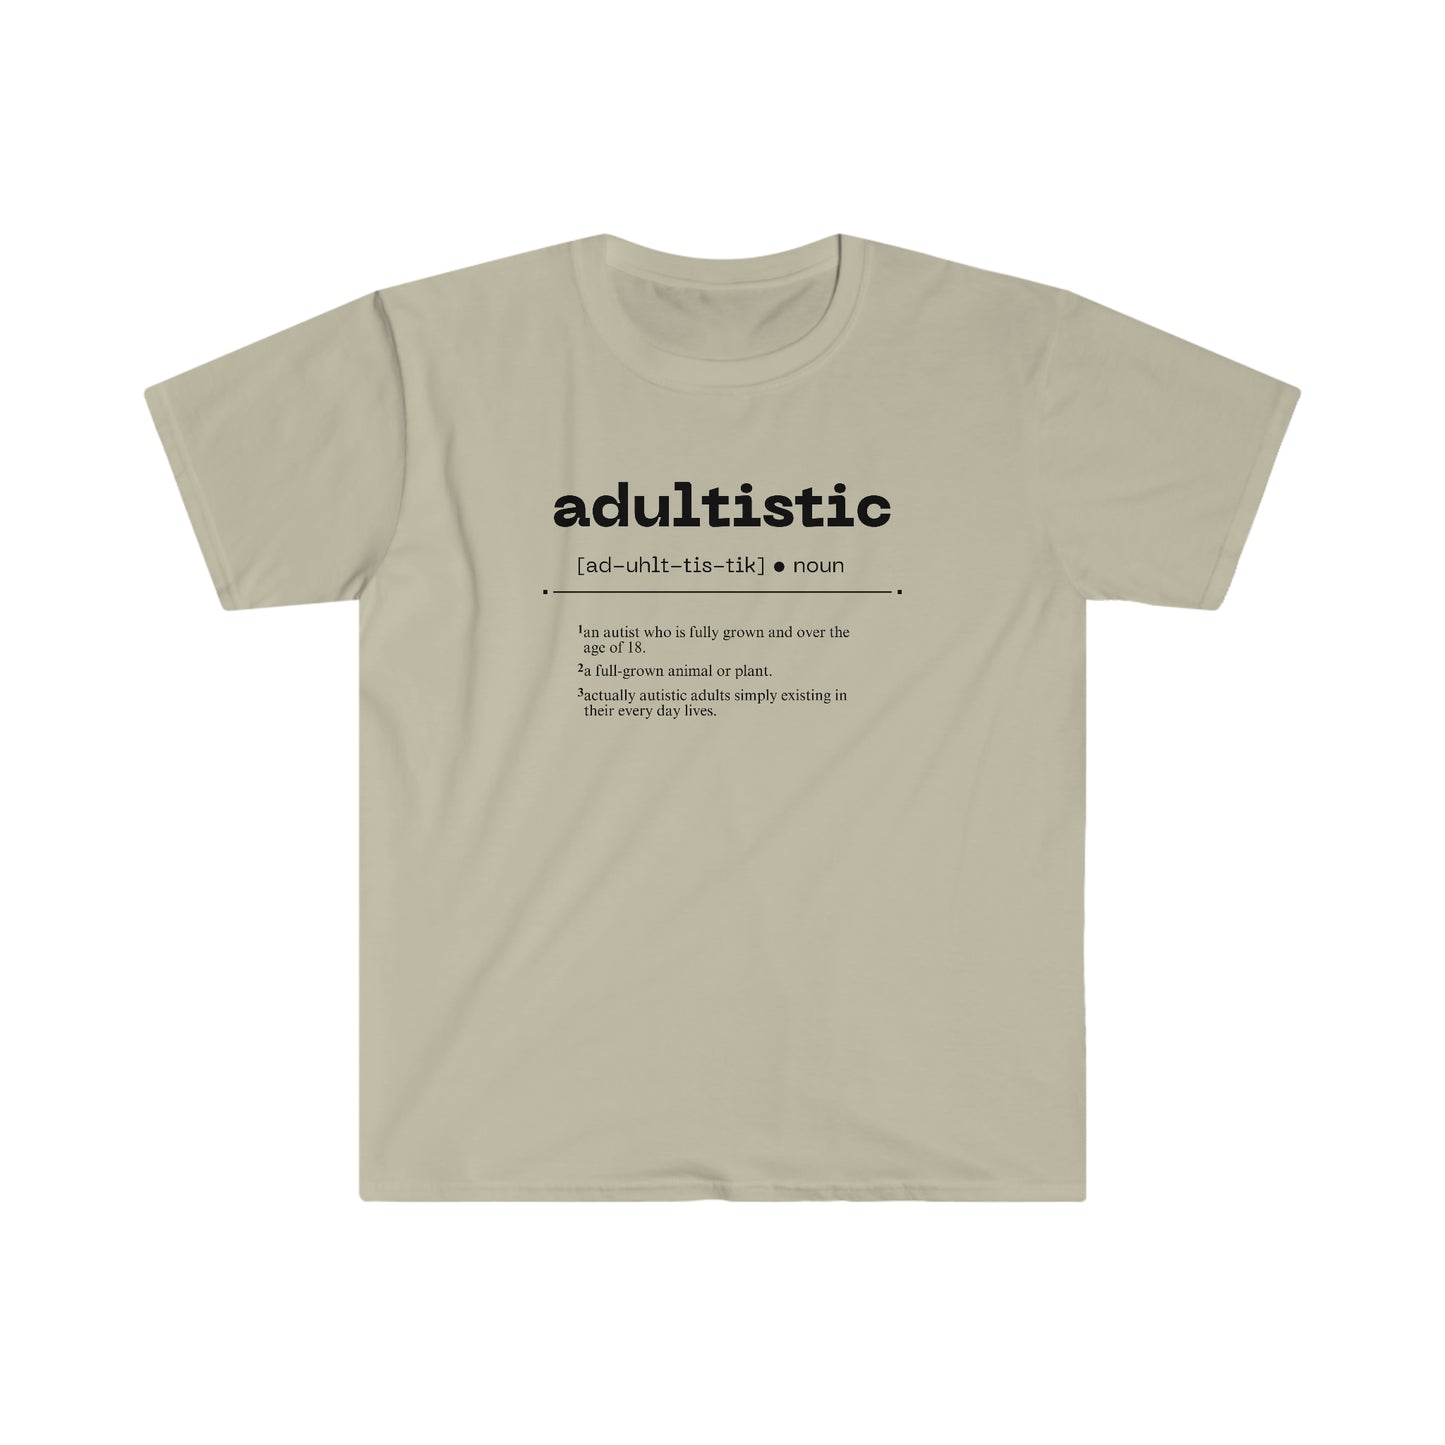 Adultistic [Redefined] Unisex Softstyle T-Shirt